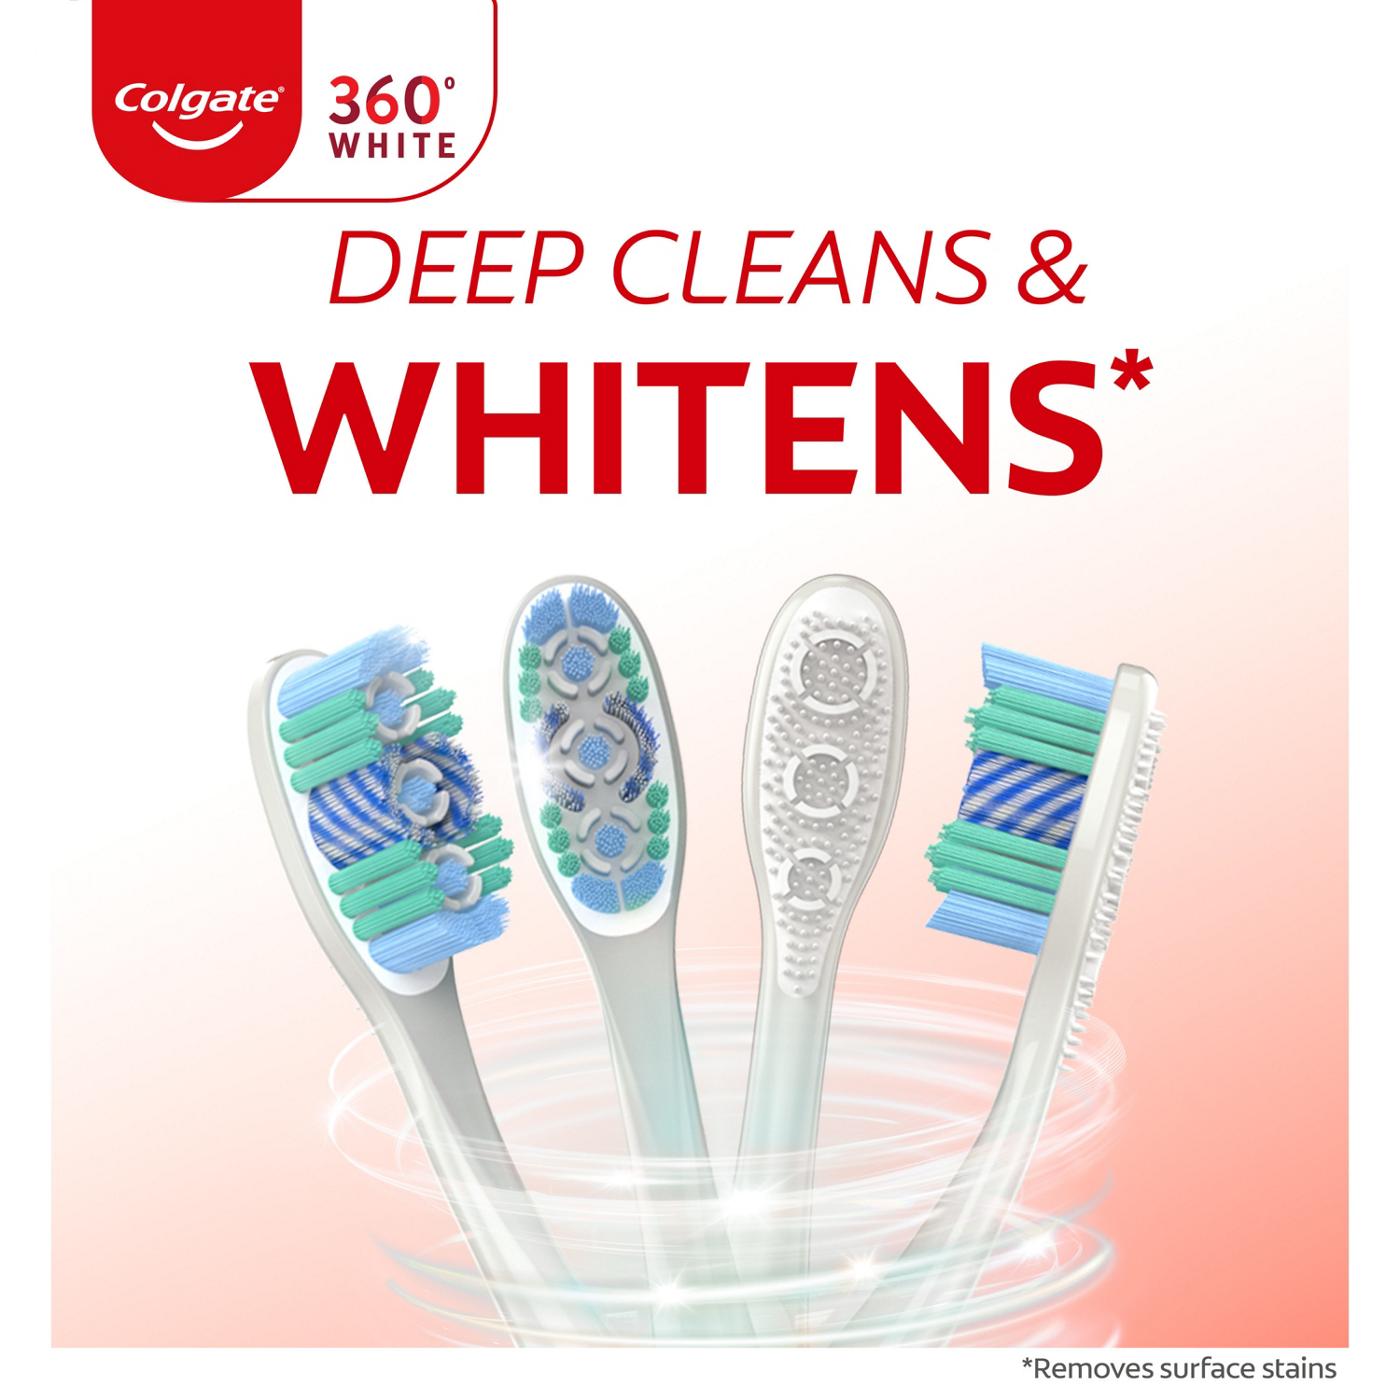 Colgate 360 Optic White Toothbrushes - Soft; image 2 of 11